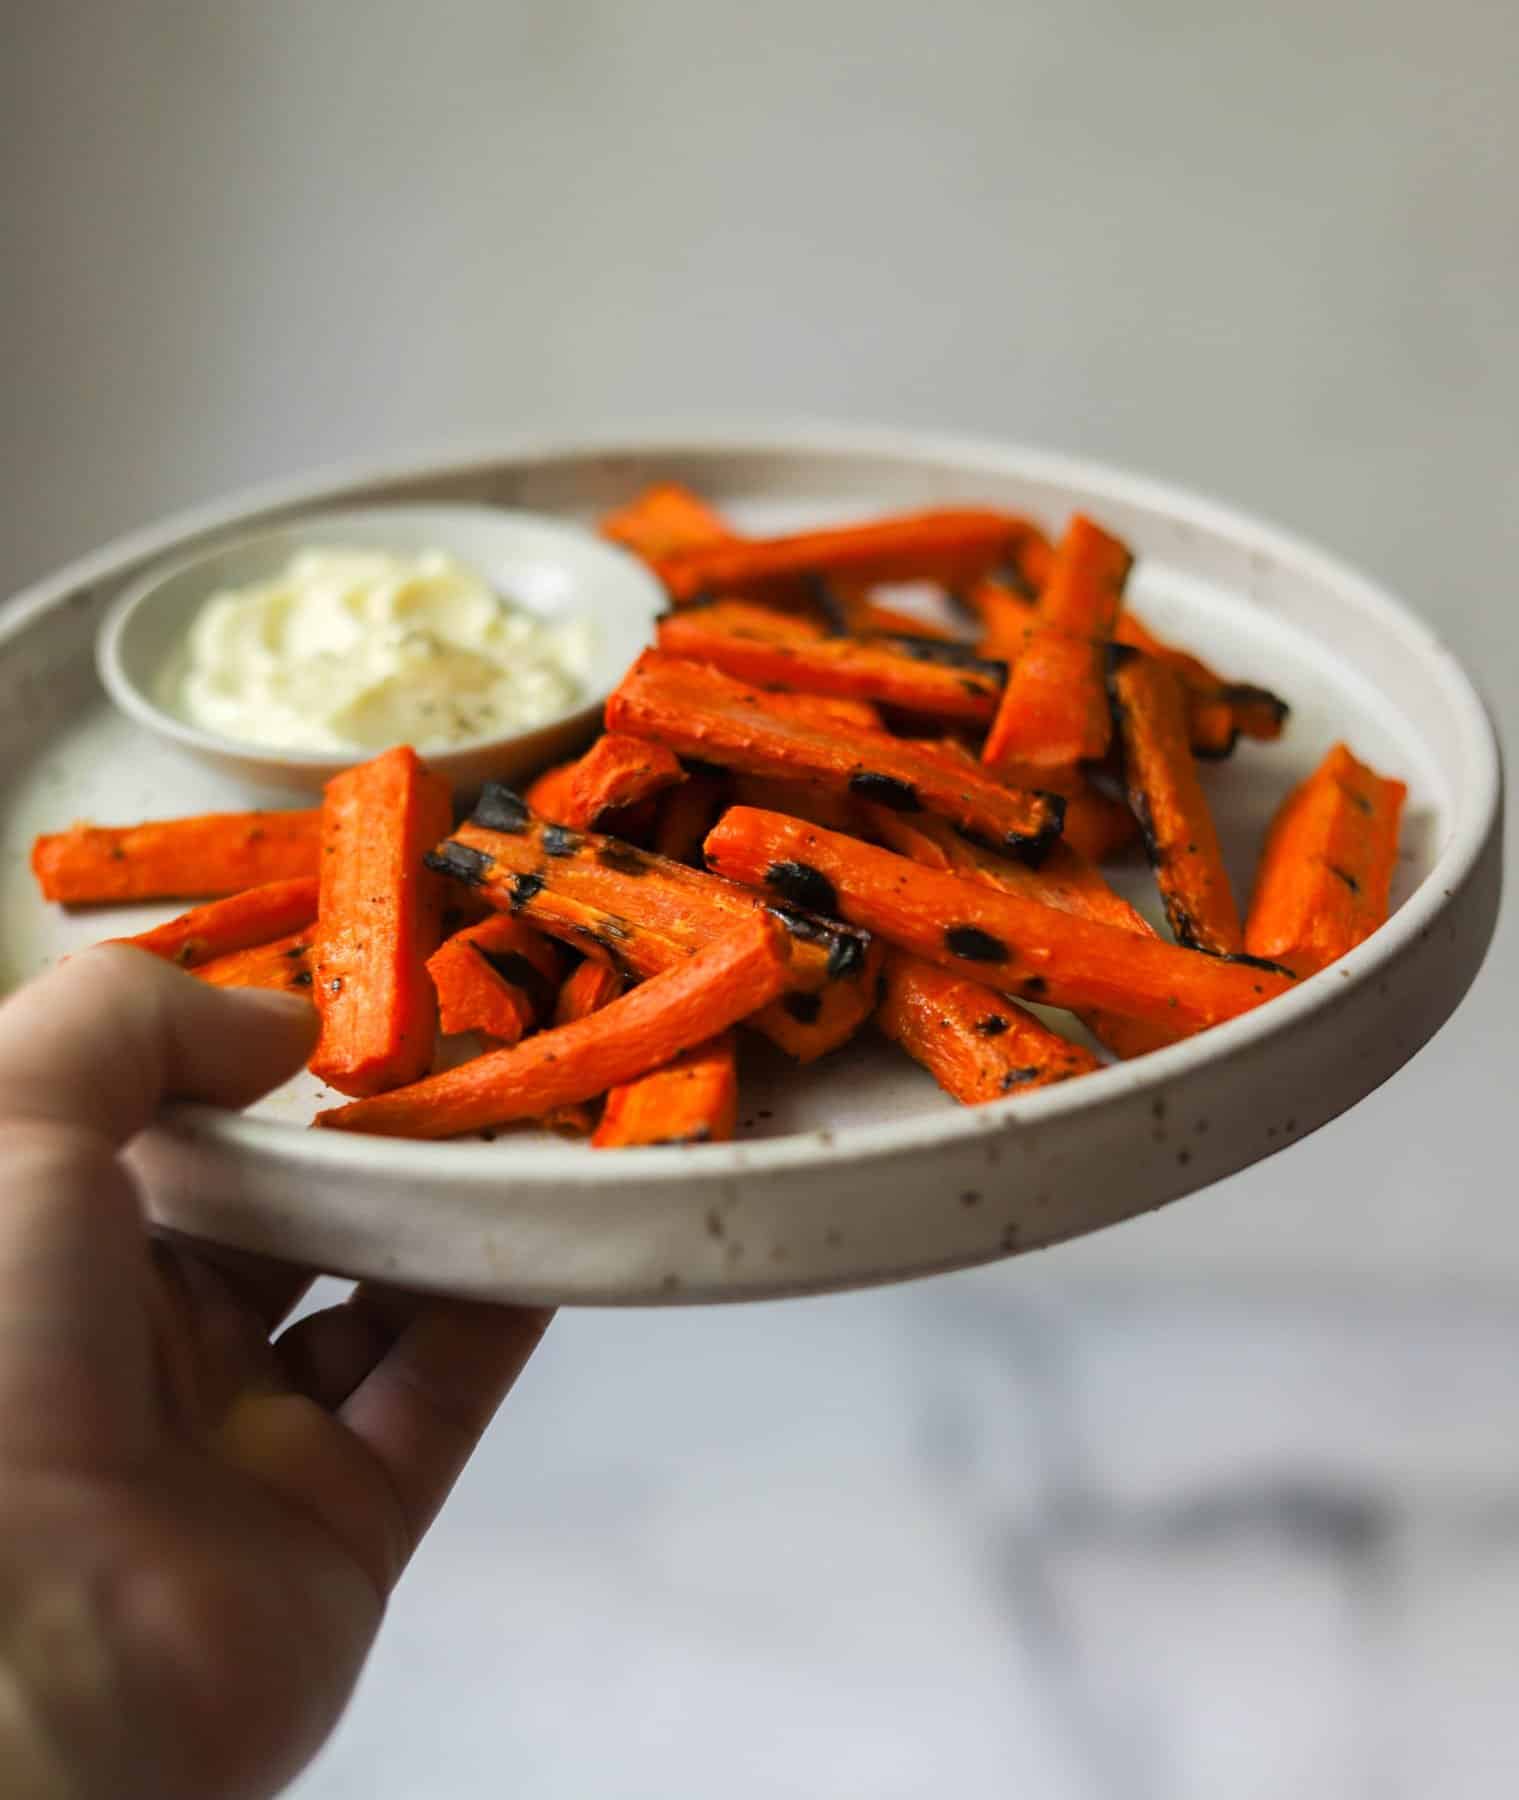 Grilled carrot fries on a stone plate